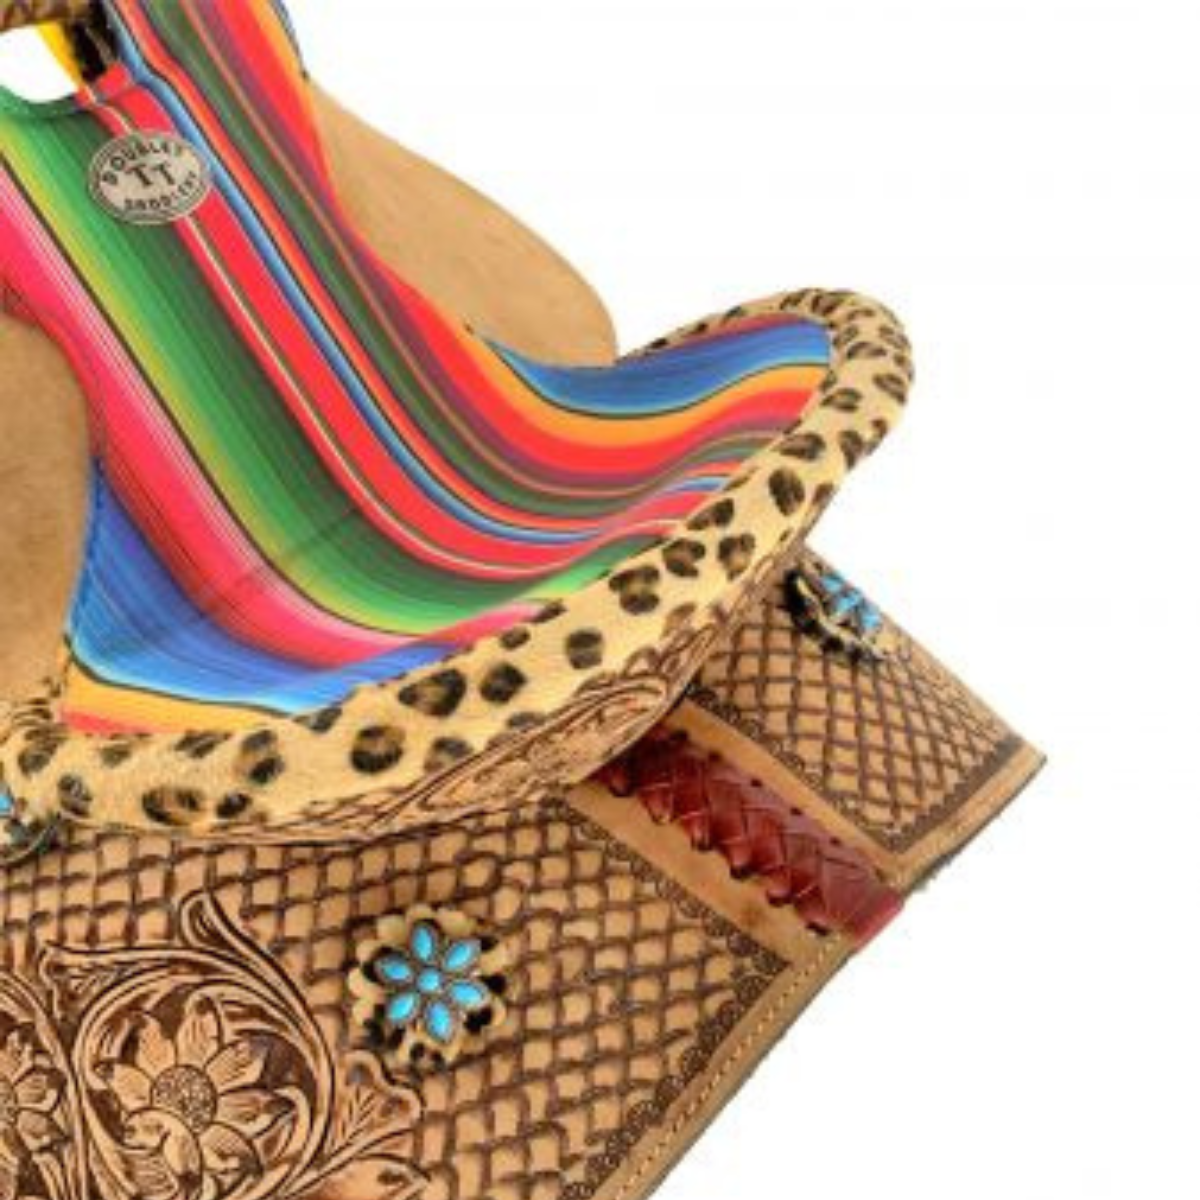 12"  DOUBLE T  BARREL STYLE WESTERN SADDLE WITH SERAPE & CHEETAH ACCENTS - Double T Saddles